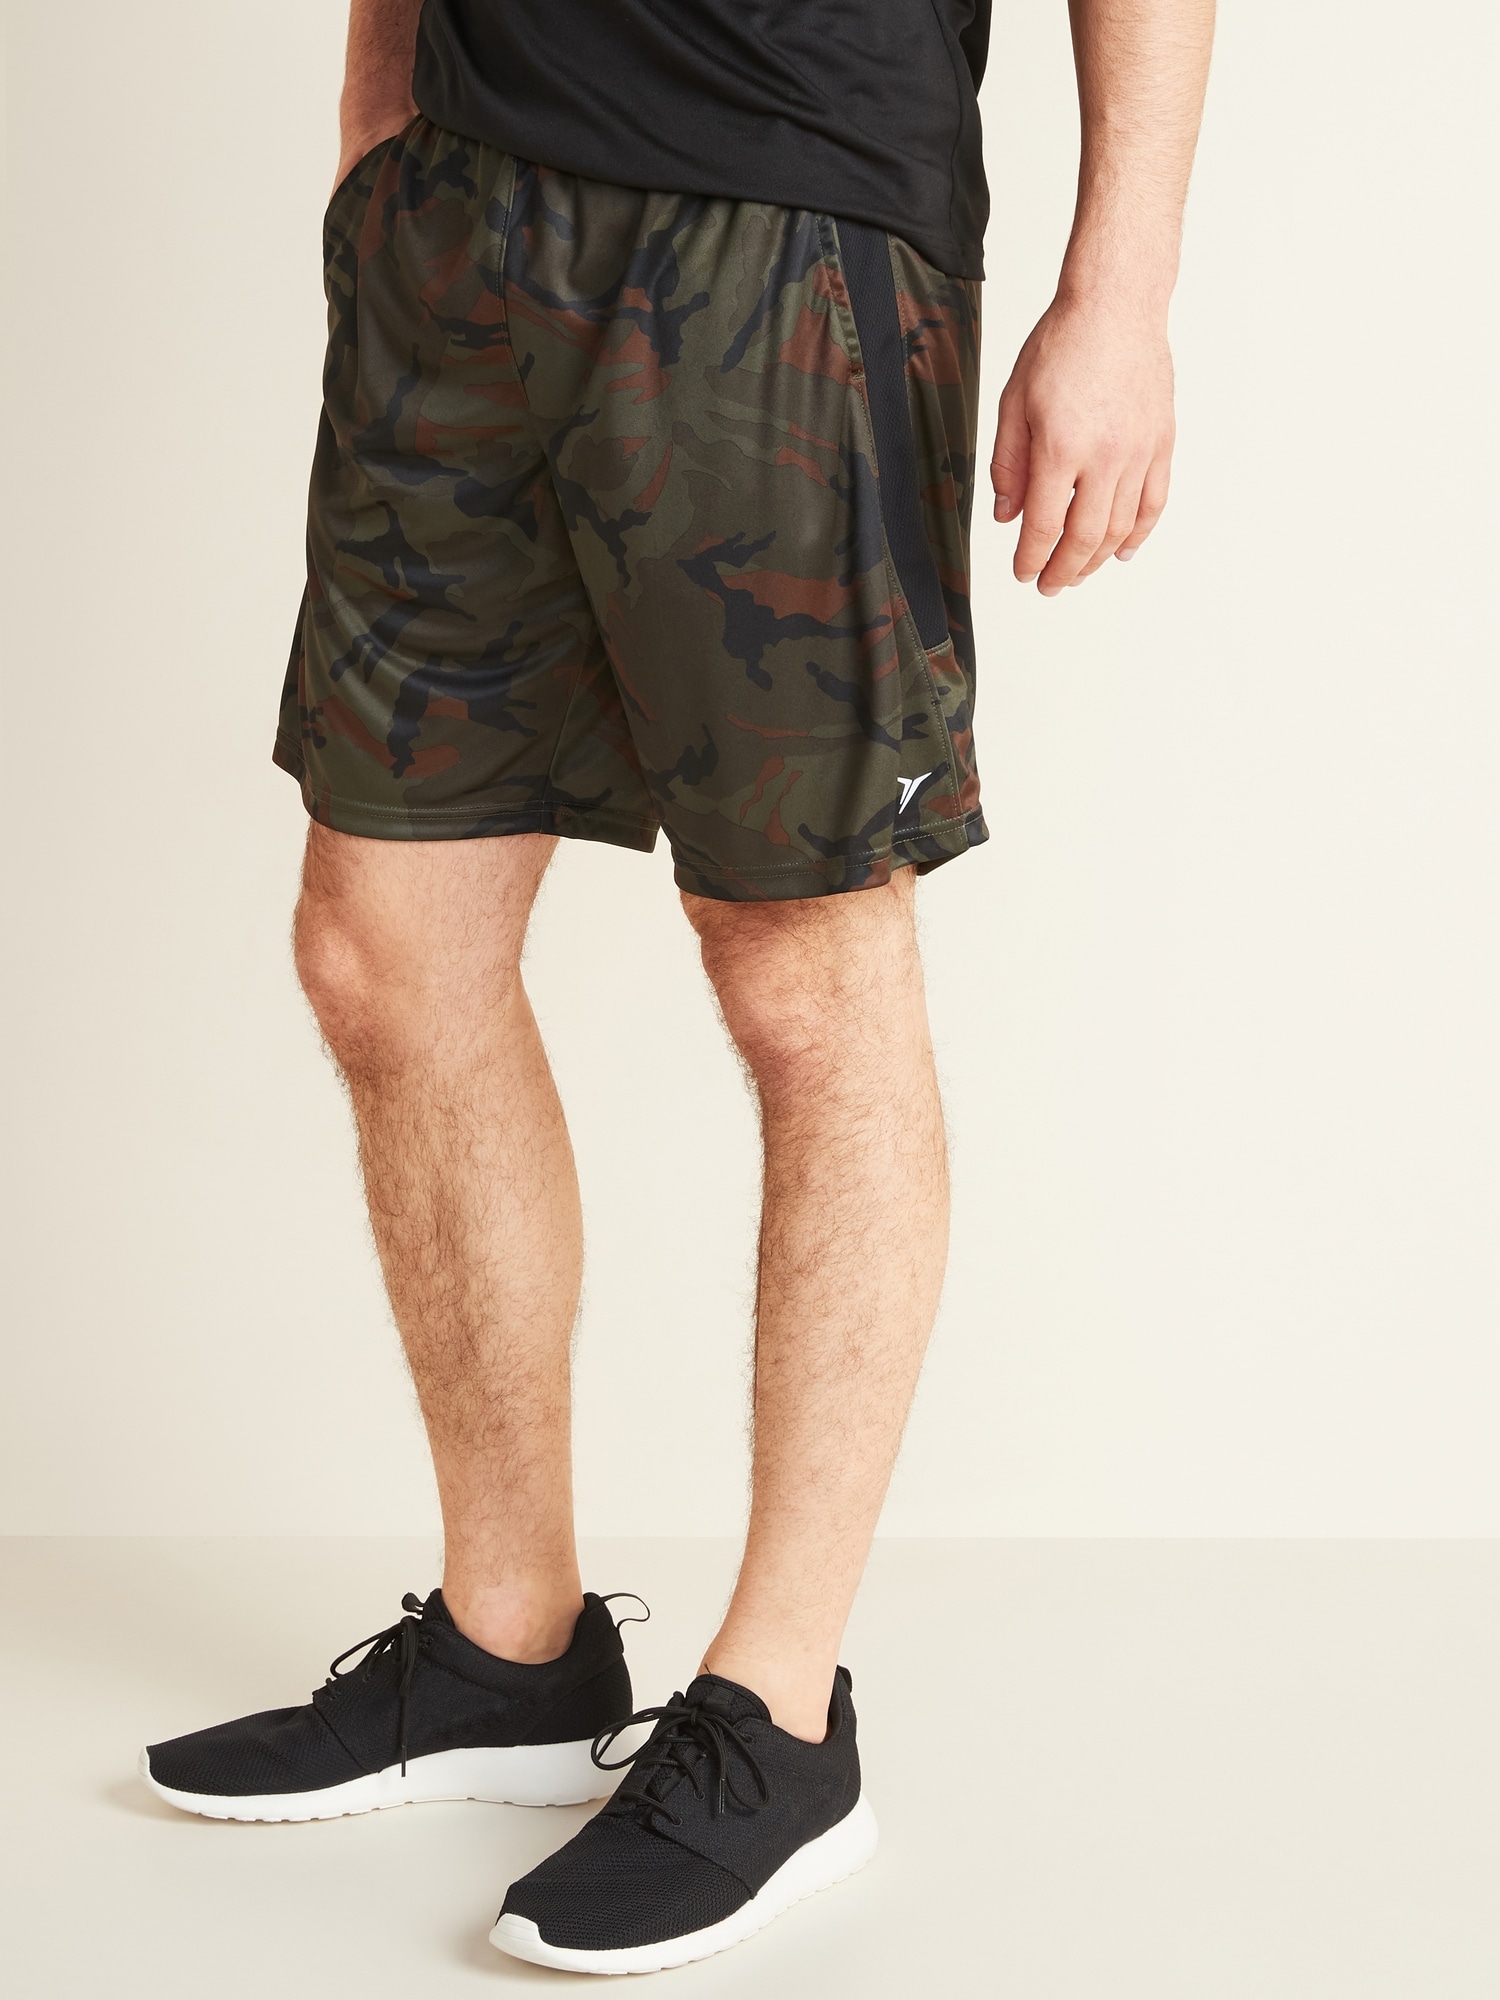 Go-Dry Side-Panel Performance Shorts - 9-inch inseam